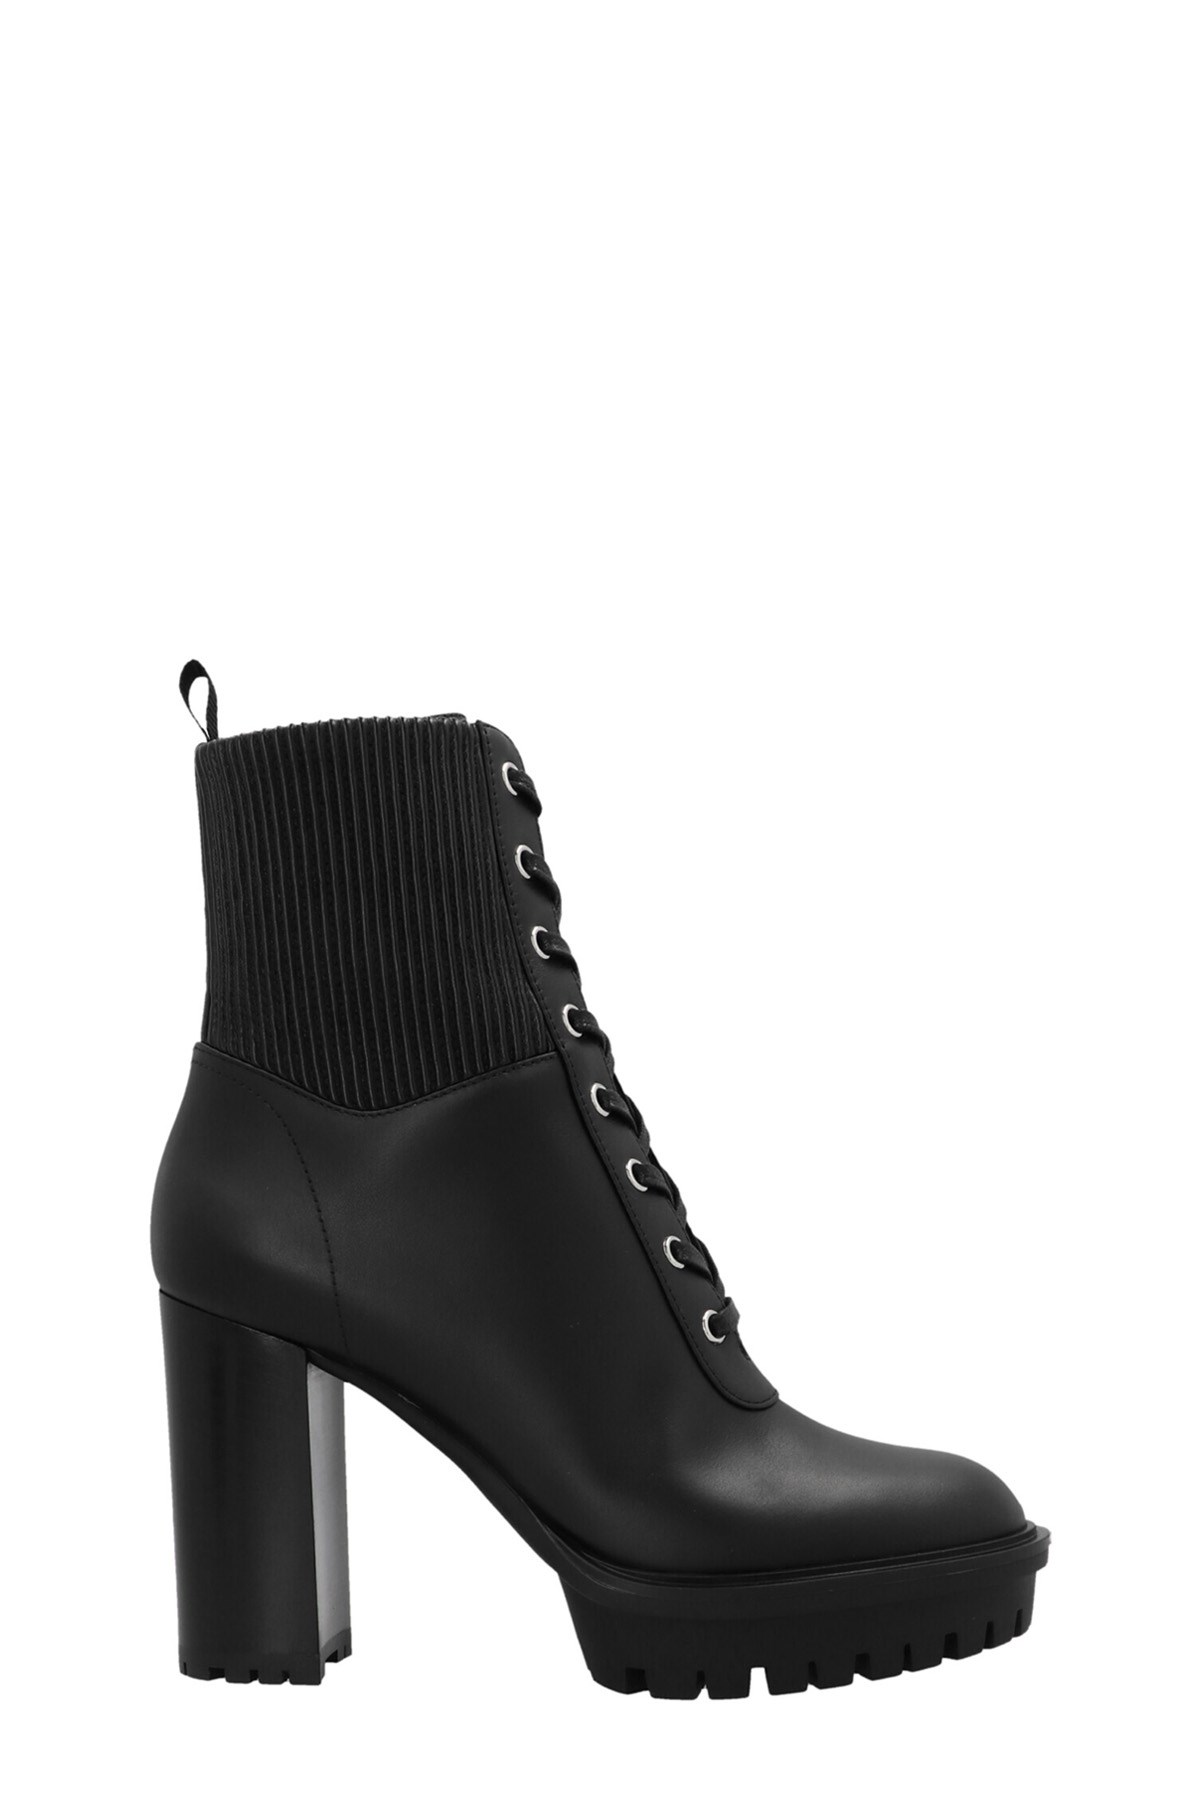 GIANVITO ROSSI Lace-Up Boots